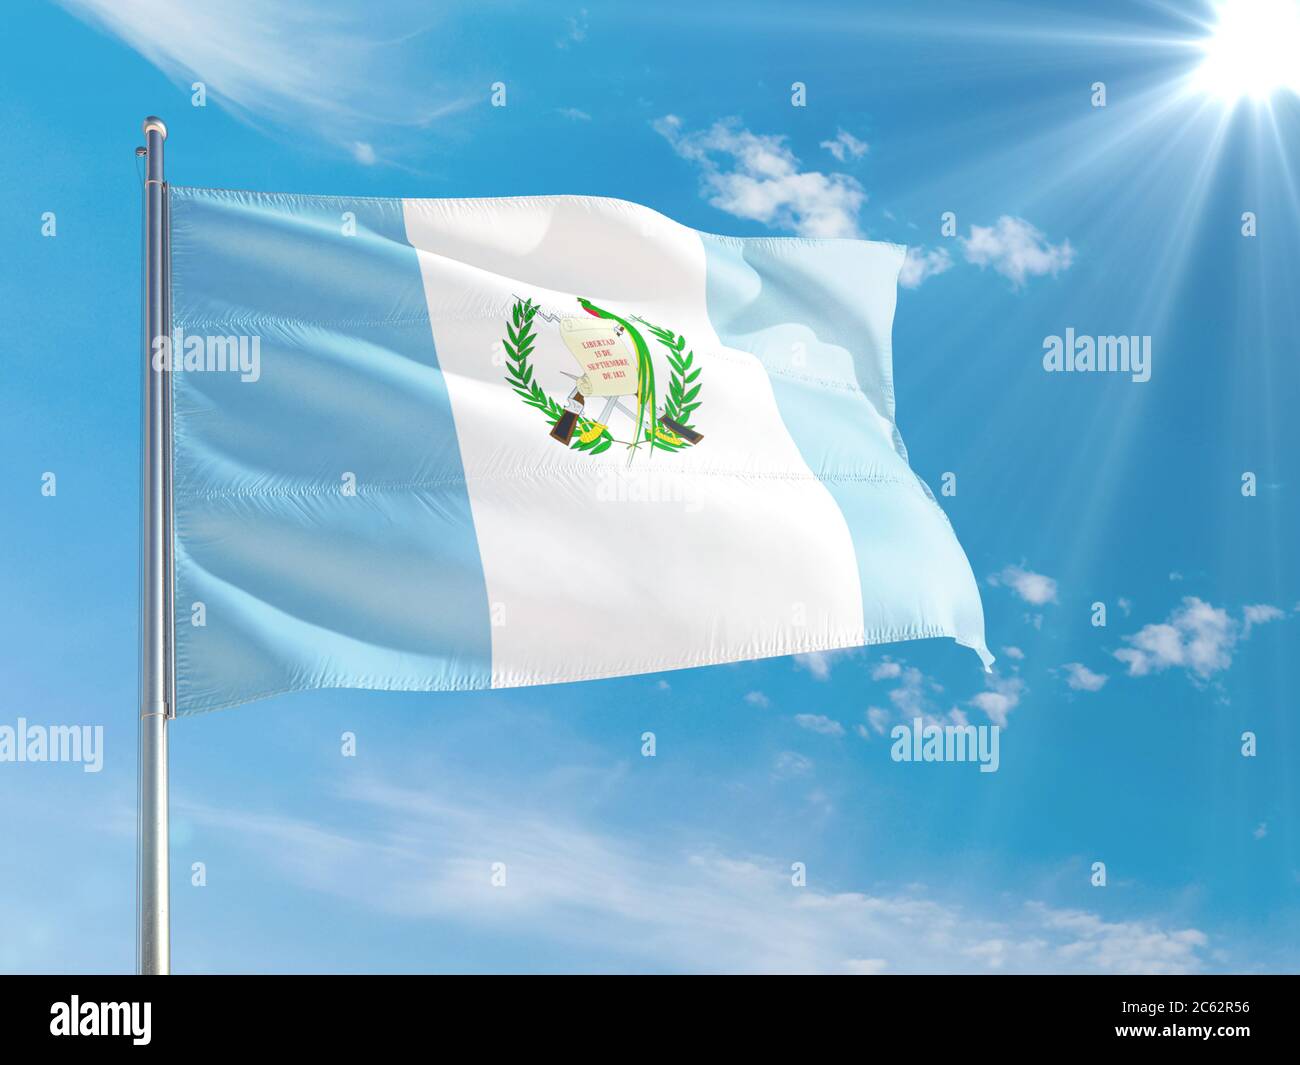 Guatemala national flag waving in the wind against deep blue sky